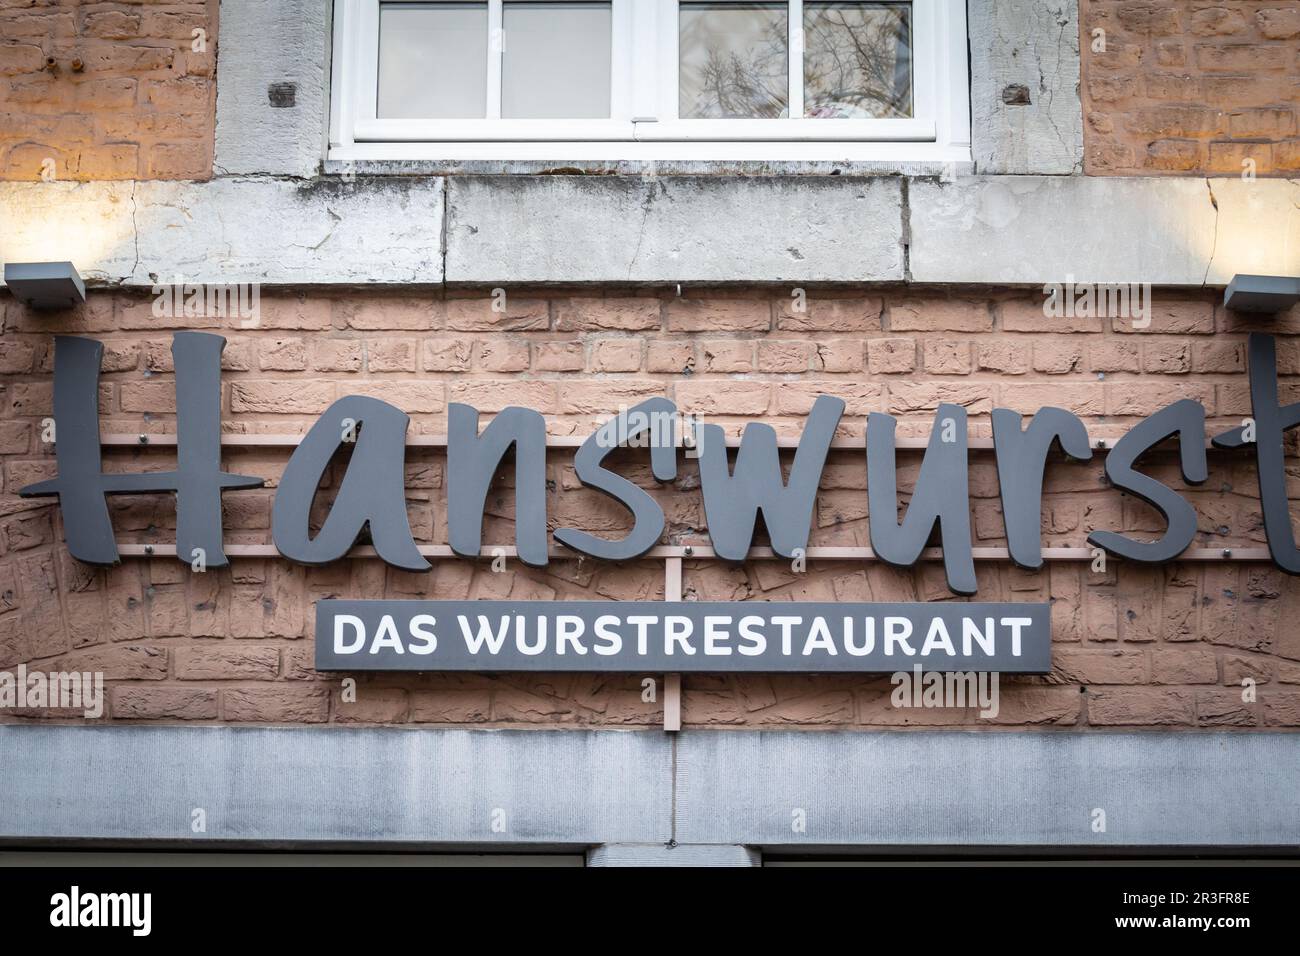 Picture of a sign with the logo of Hanswurst restaurant in aachen, germany. it's a german restaurant specialized in Wurst, or wursten, a symbol of Ger Stock Photo